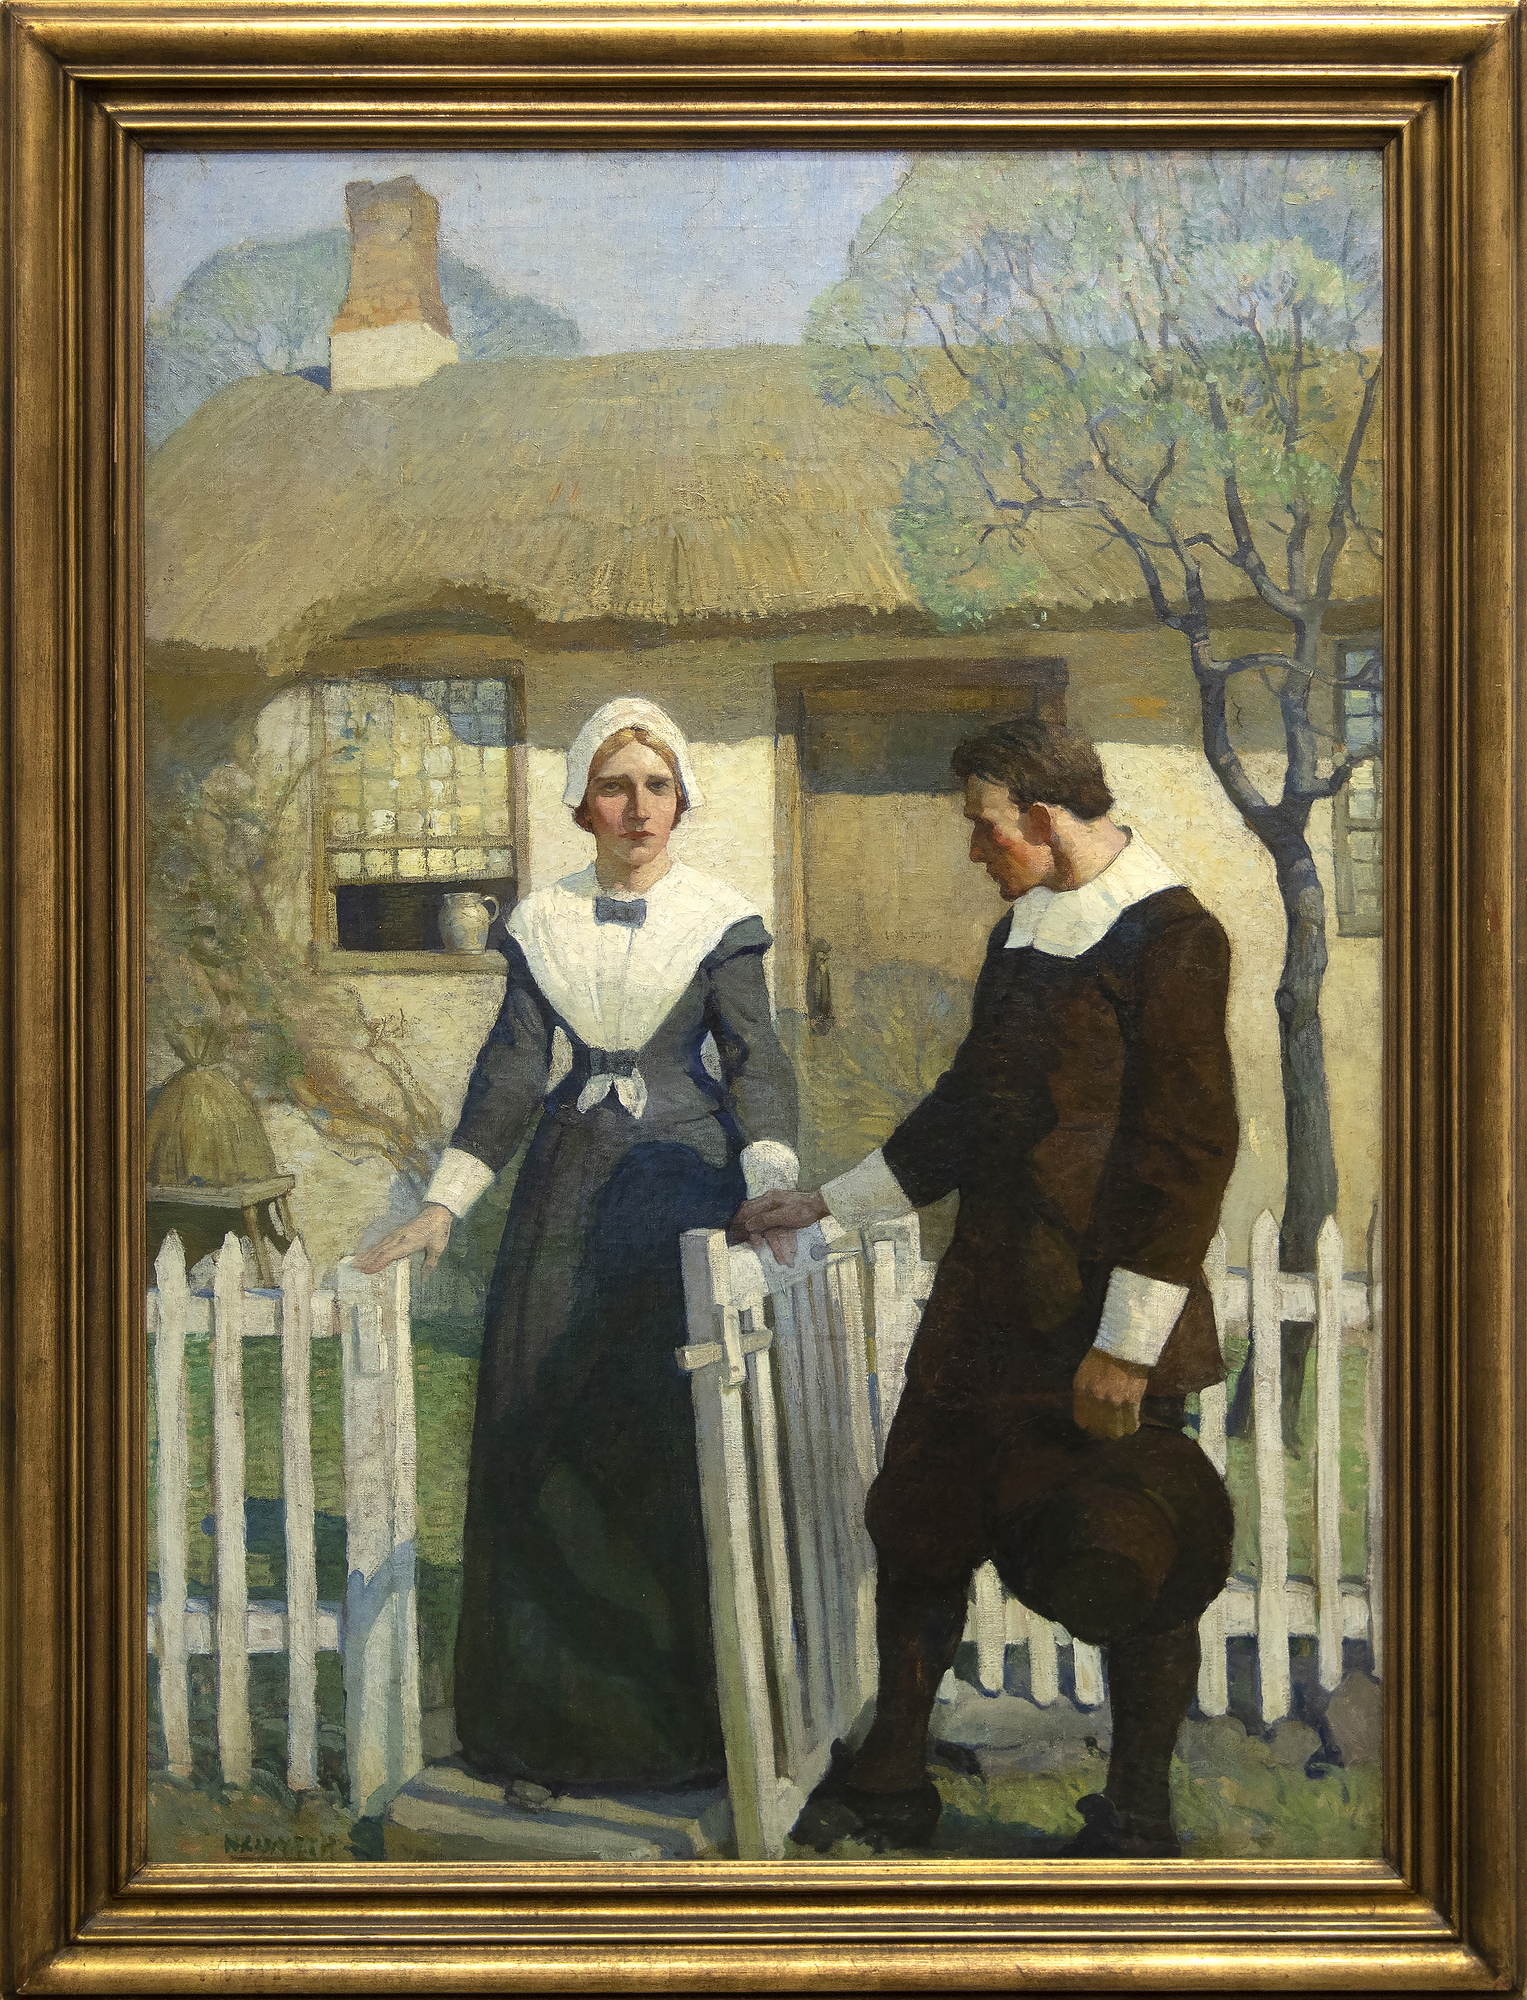 Initially used as a frontispiece illustration for the 1914 novel, “The Witch,” by Mary Johnston, Wyeth’s painting presents a poignant scene of friendship and understanding between a grieving, independent woman and a generous, misunderstood doctor. Although the two hardly know each other, they have a shared understanding of and reverence for what is good. While the rest of the town searches for the devil in all things, these two choose kindness and light. Here, they take a moment to appreciate the lives they have led and the good they have done. Wyeth’s illustration depicts hope and expectation of good despite the perils and sorrows of human life.&lt;br&gt;&lt;br&gt;In addition to illustrating more than 100 books, including adventure classics like Treasure Island, Kidnapped, Robinson Crusoe, and The Last of the Mohicans, Wyeth was also a highly regarded muralist, receiving numerous commissions for prestigious corporate and government buildings throughout the United States. Wyeth’s style, honed by early work at the Saturday Evening Post and Scribner’s, demonstrates his keen awareness of the revealing gesture, allowing readers to instantly grasp the essence of a scene.